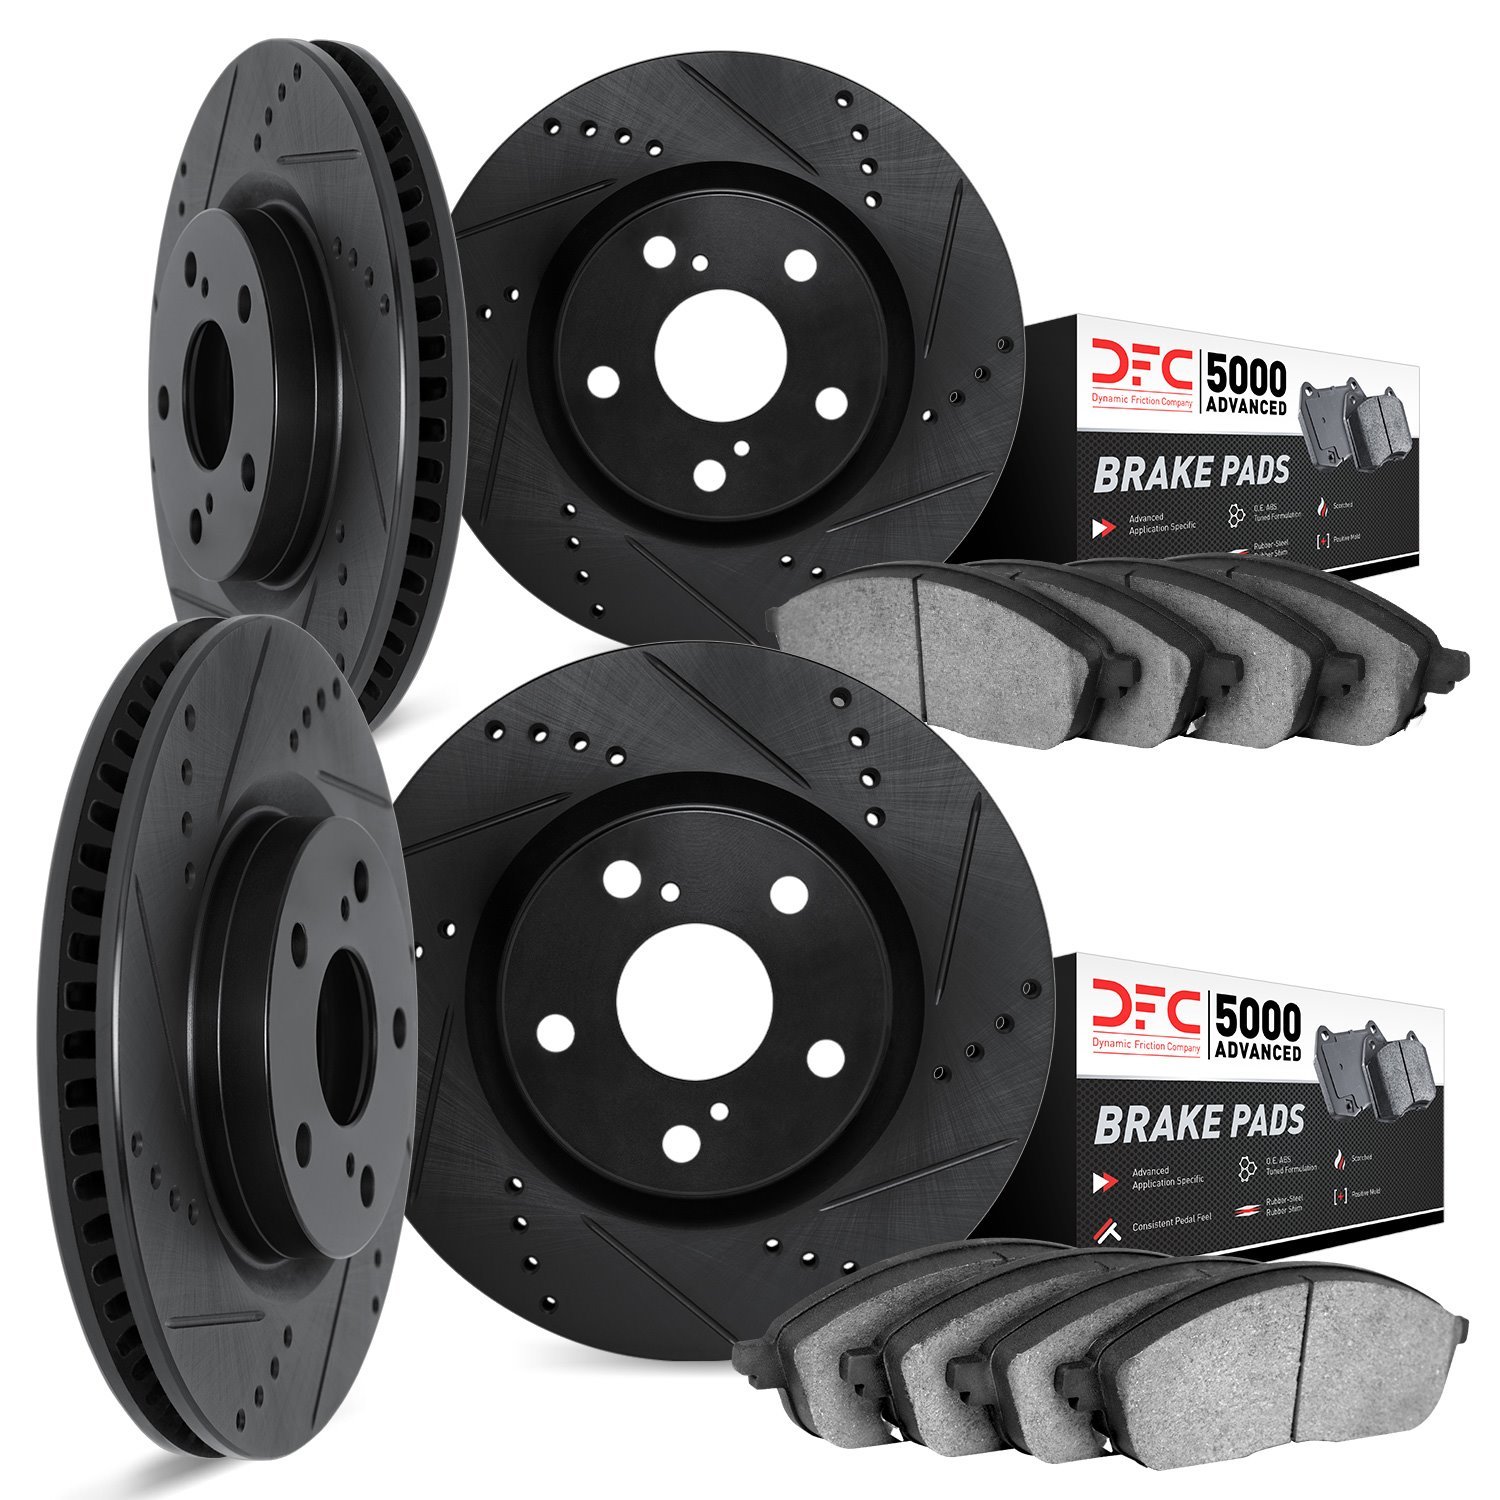 8504-02013 Drilled/Slotted Brake Rotors w/5000 Advanced Brake Pads Kit [Black], 1987-1989 Porsche, Position: Front and Rear